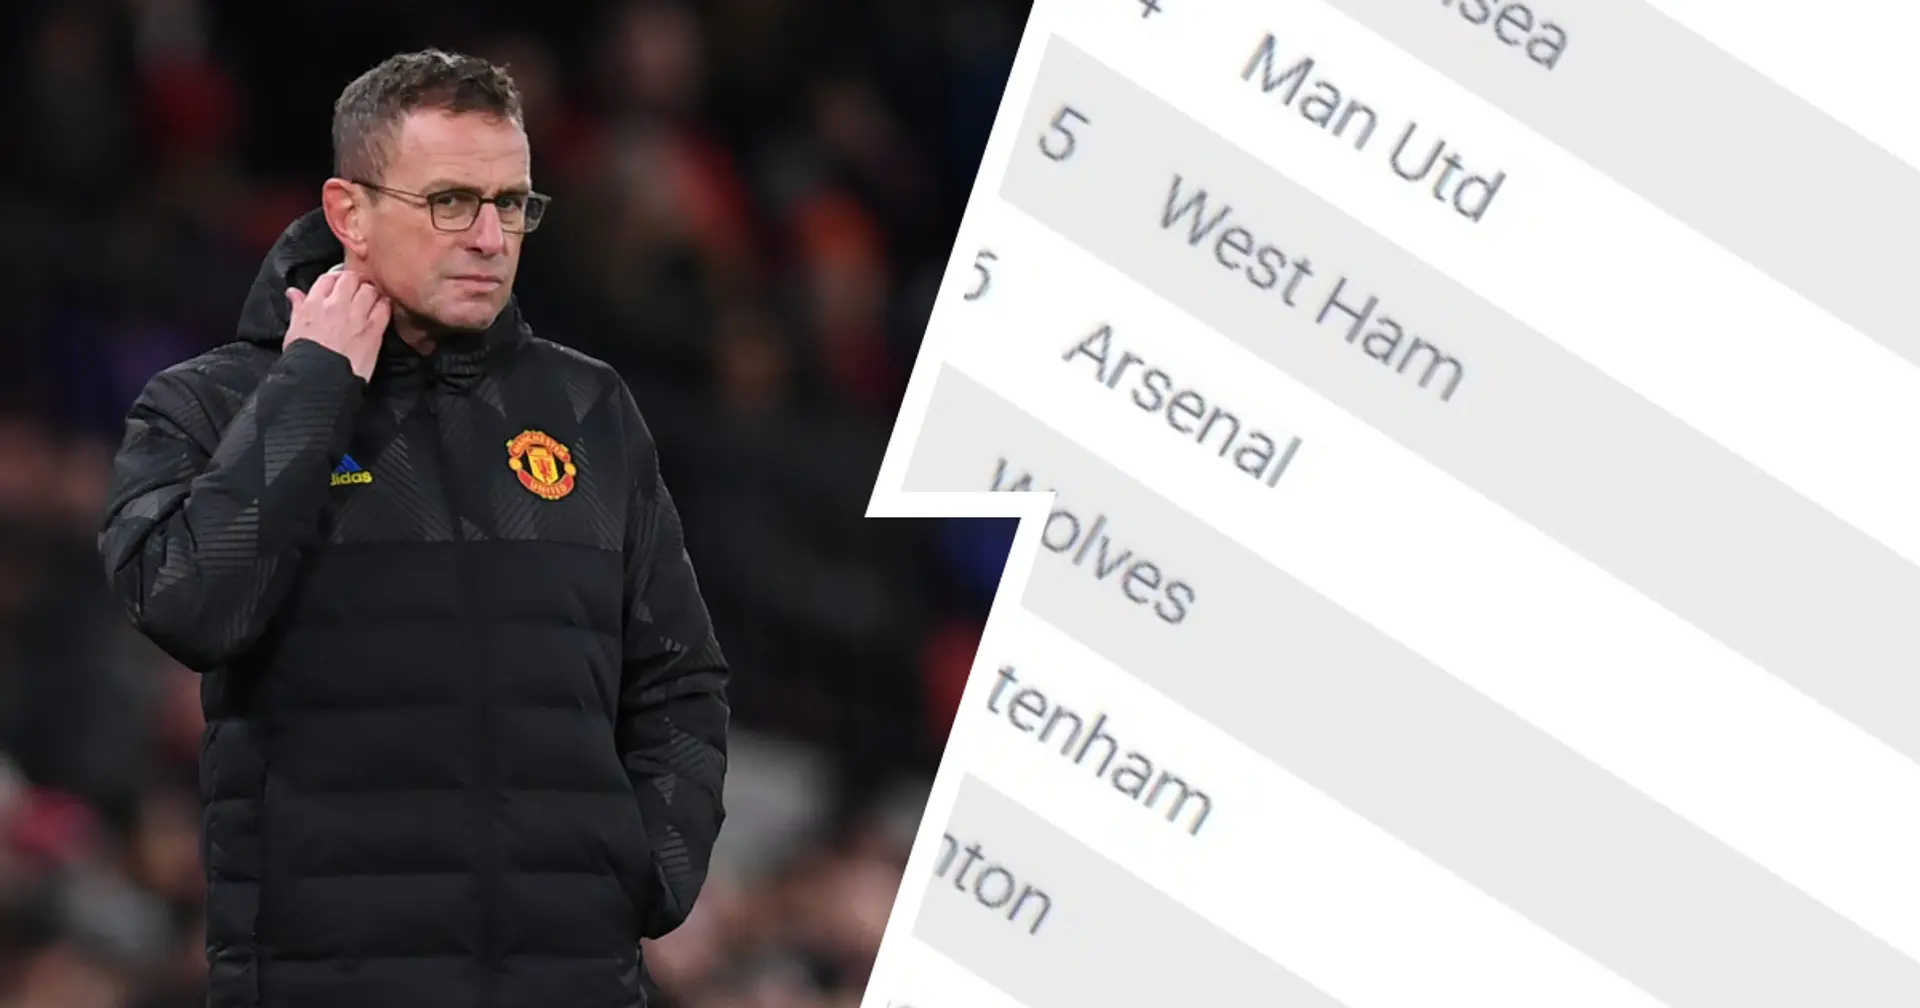 Man United could stay fourth — or drop to fifth: how Premier League table can change this weekend